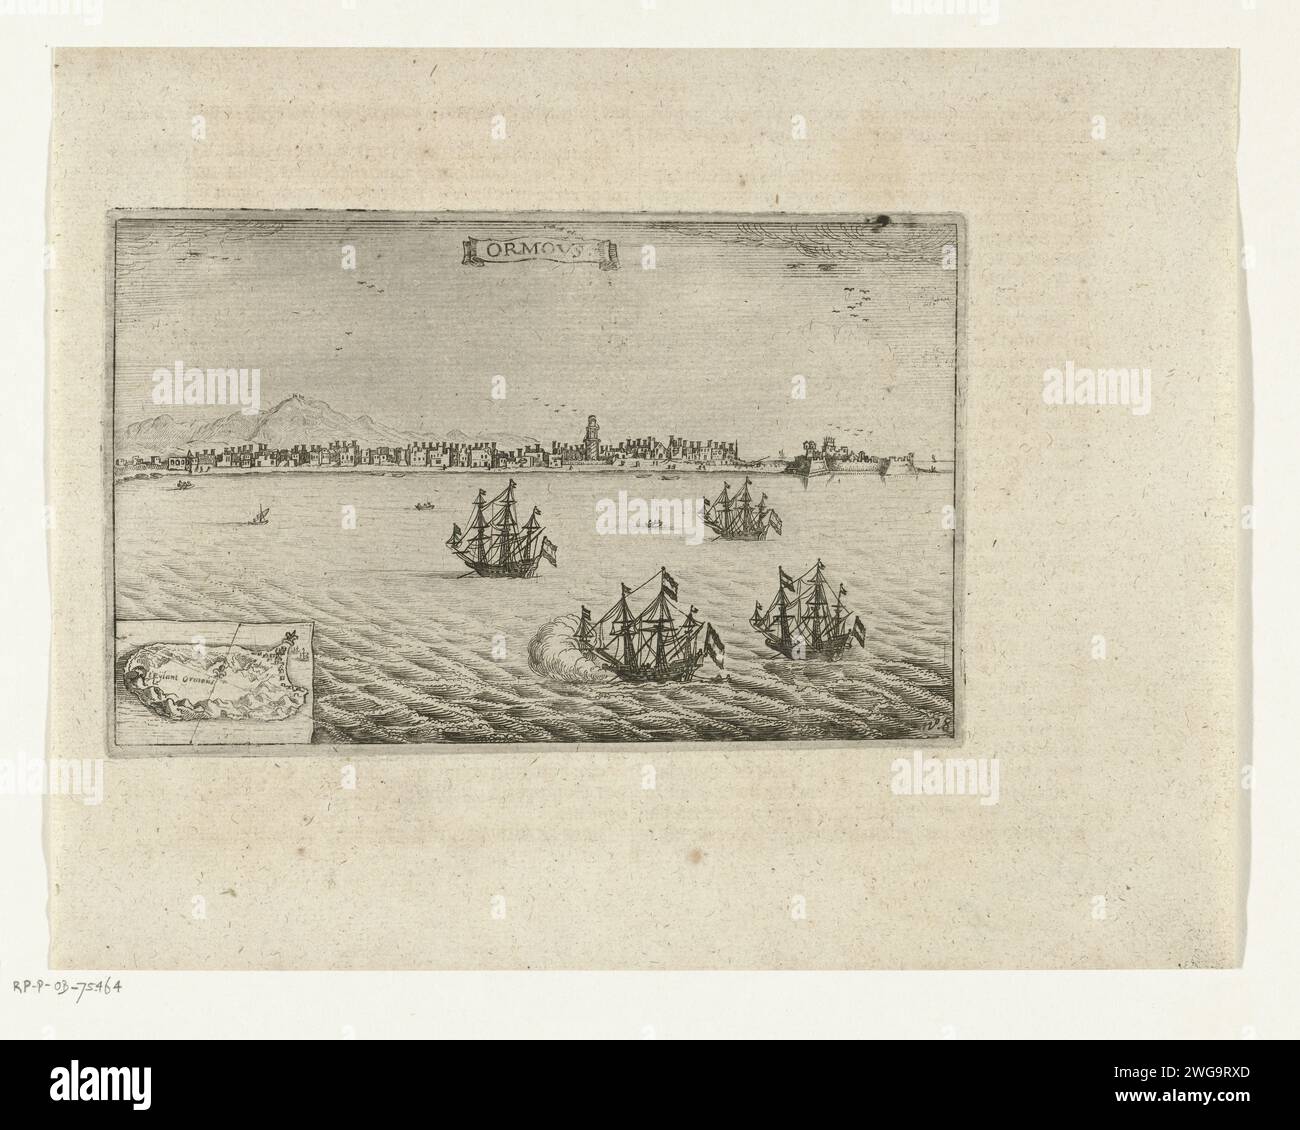 Ships at the island of Hormoz, 1629, 1646 print Ships on the island of Hormoz and the city of Gamron (Bandar-e Abbas) on the mainland of Persia, February 1629. At the bottom left a bet with a small card from the island of Hormoz. Part of the illustrations in the report of the trips of Pieter van den Broecke to the East Indies, 1605-1640, No. 8. Northern Netherlands paper etching / engraving exploration, expedition, voyage of discovery. landscapes in tropical and sub-tropical regions Hormoz, Jazih-YE. Gamron Stock Photo